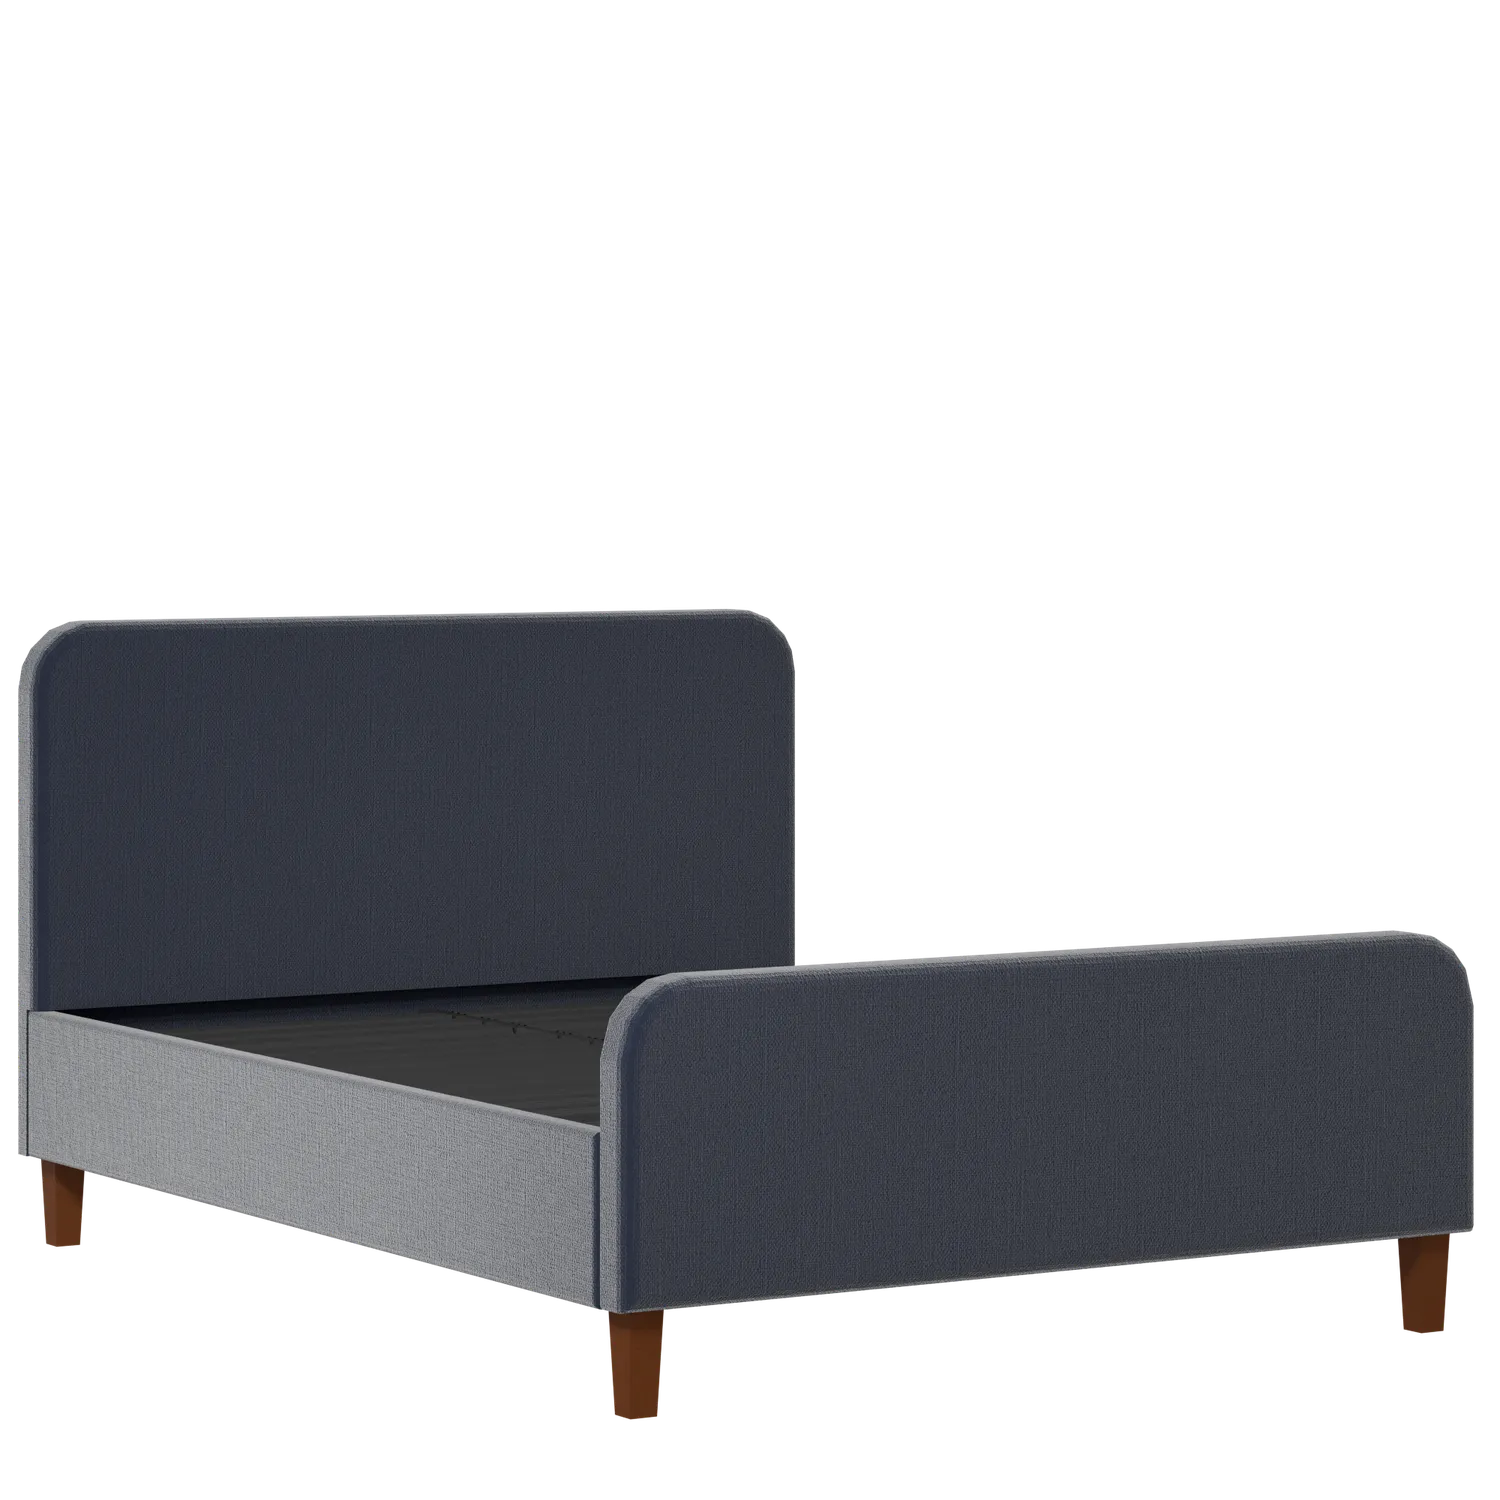 Broughton upholstered bed in oxford blue fabric